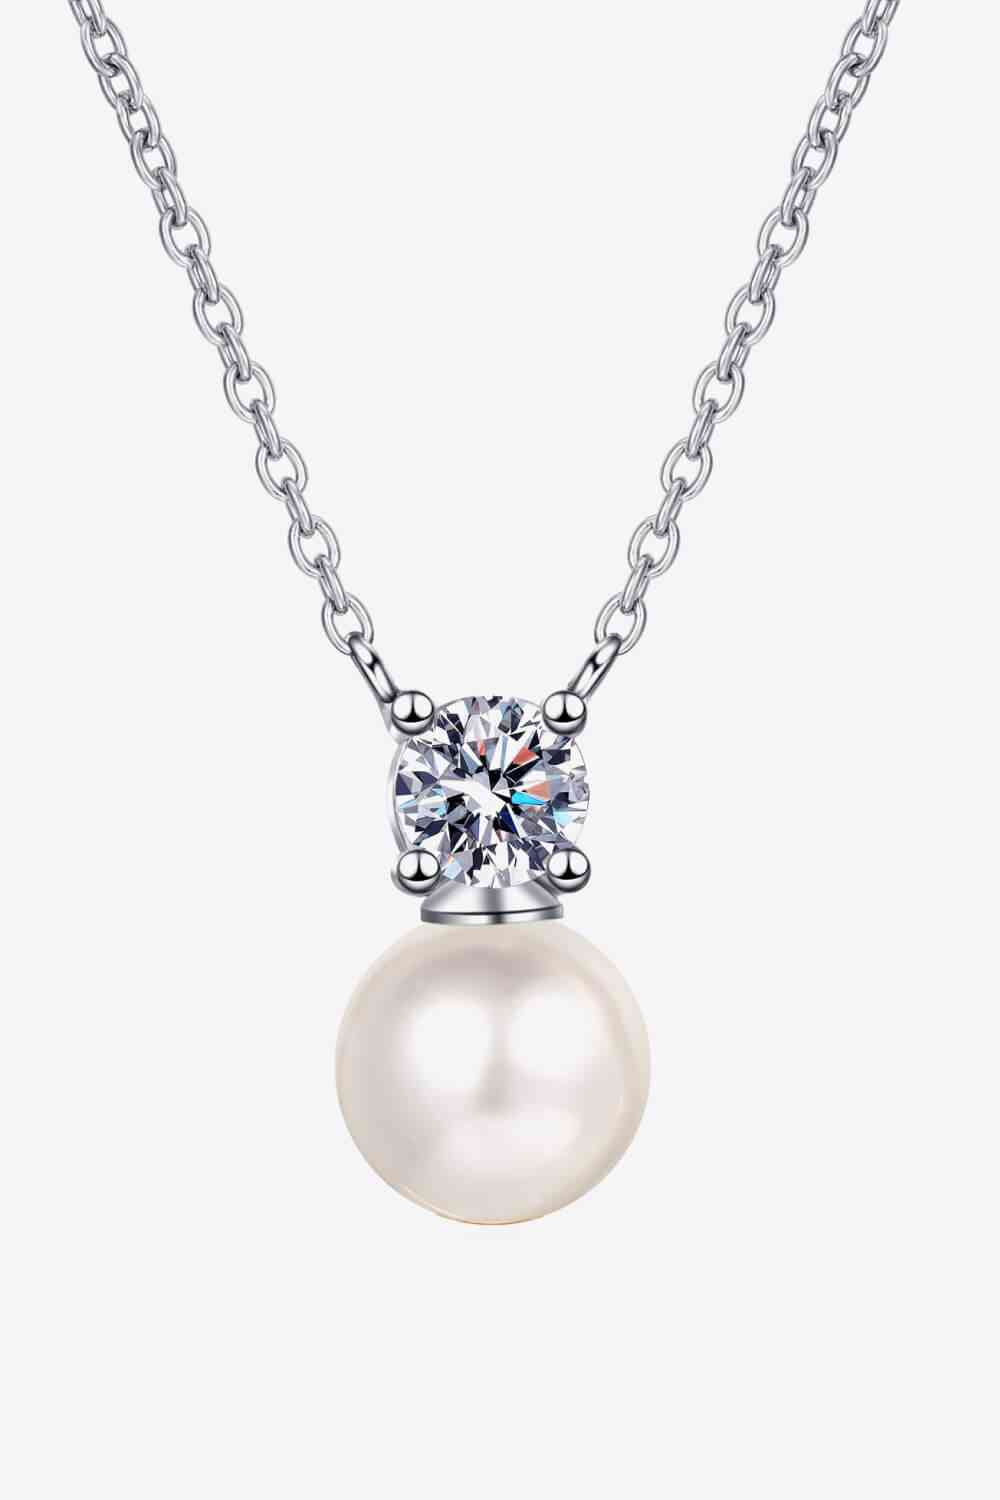 925 Sterling Silver Freshwater Pearl Moissanite Necklace